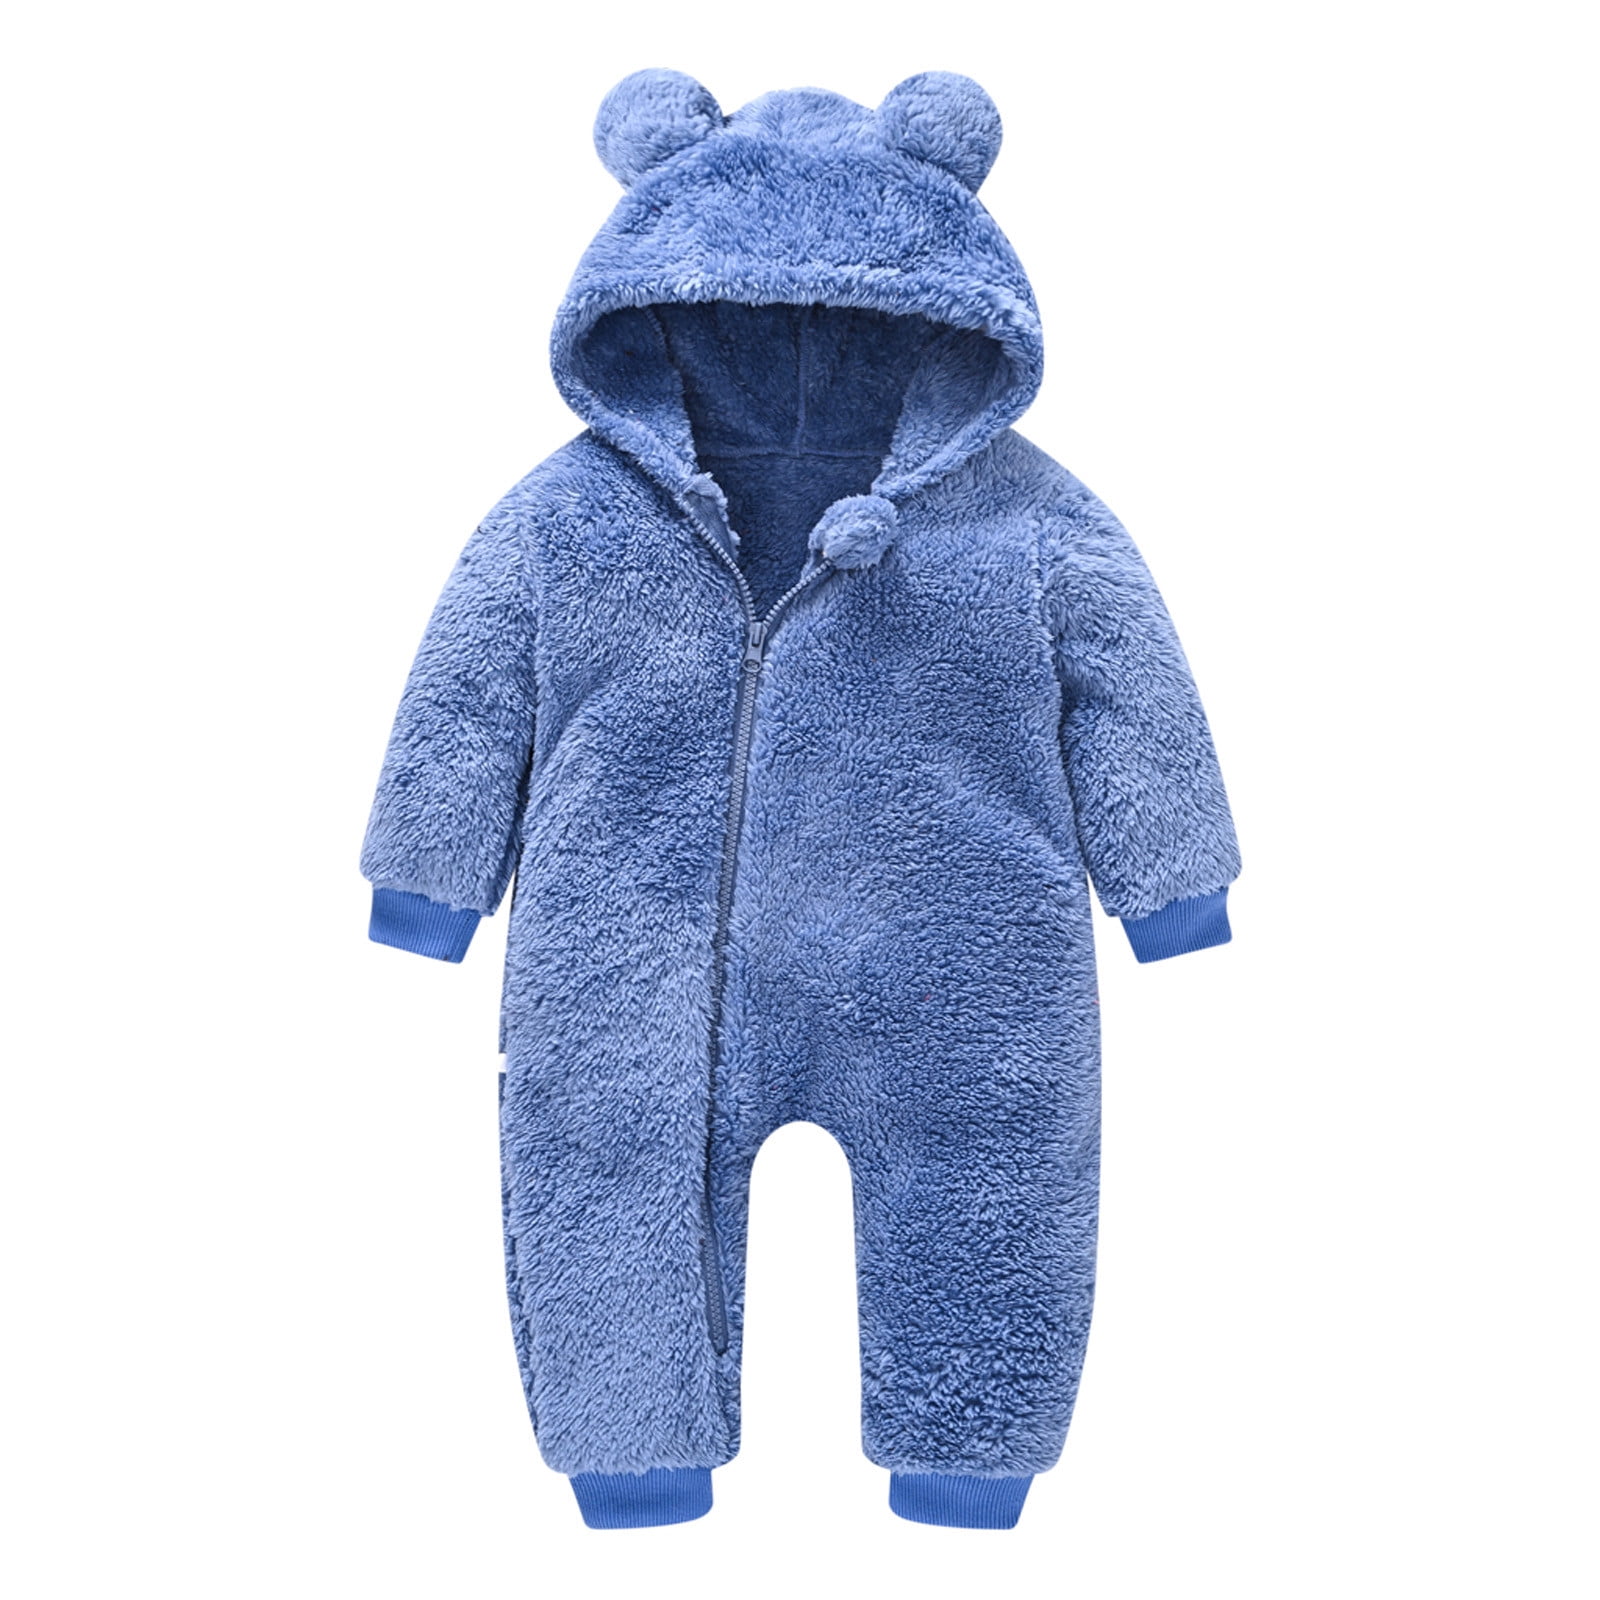 Eurobuy Newborn Cartoon Bear Snowsuit Baby Infant Winter Thick Snowsuit Coat Footed Romper Front Snaps Warm Jumpsuit for Baby Girl Boy